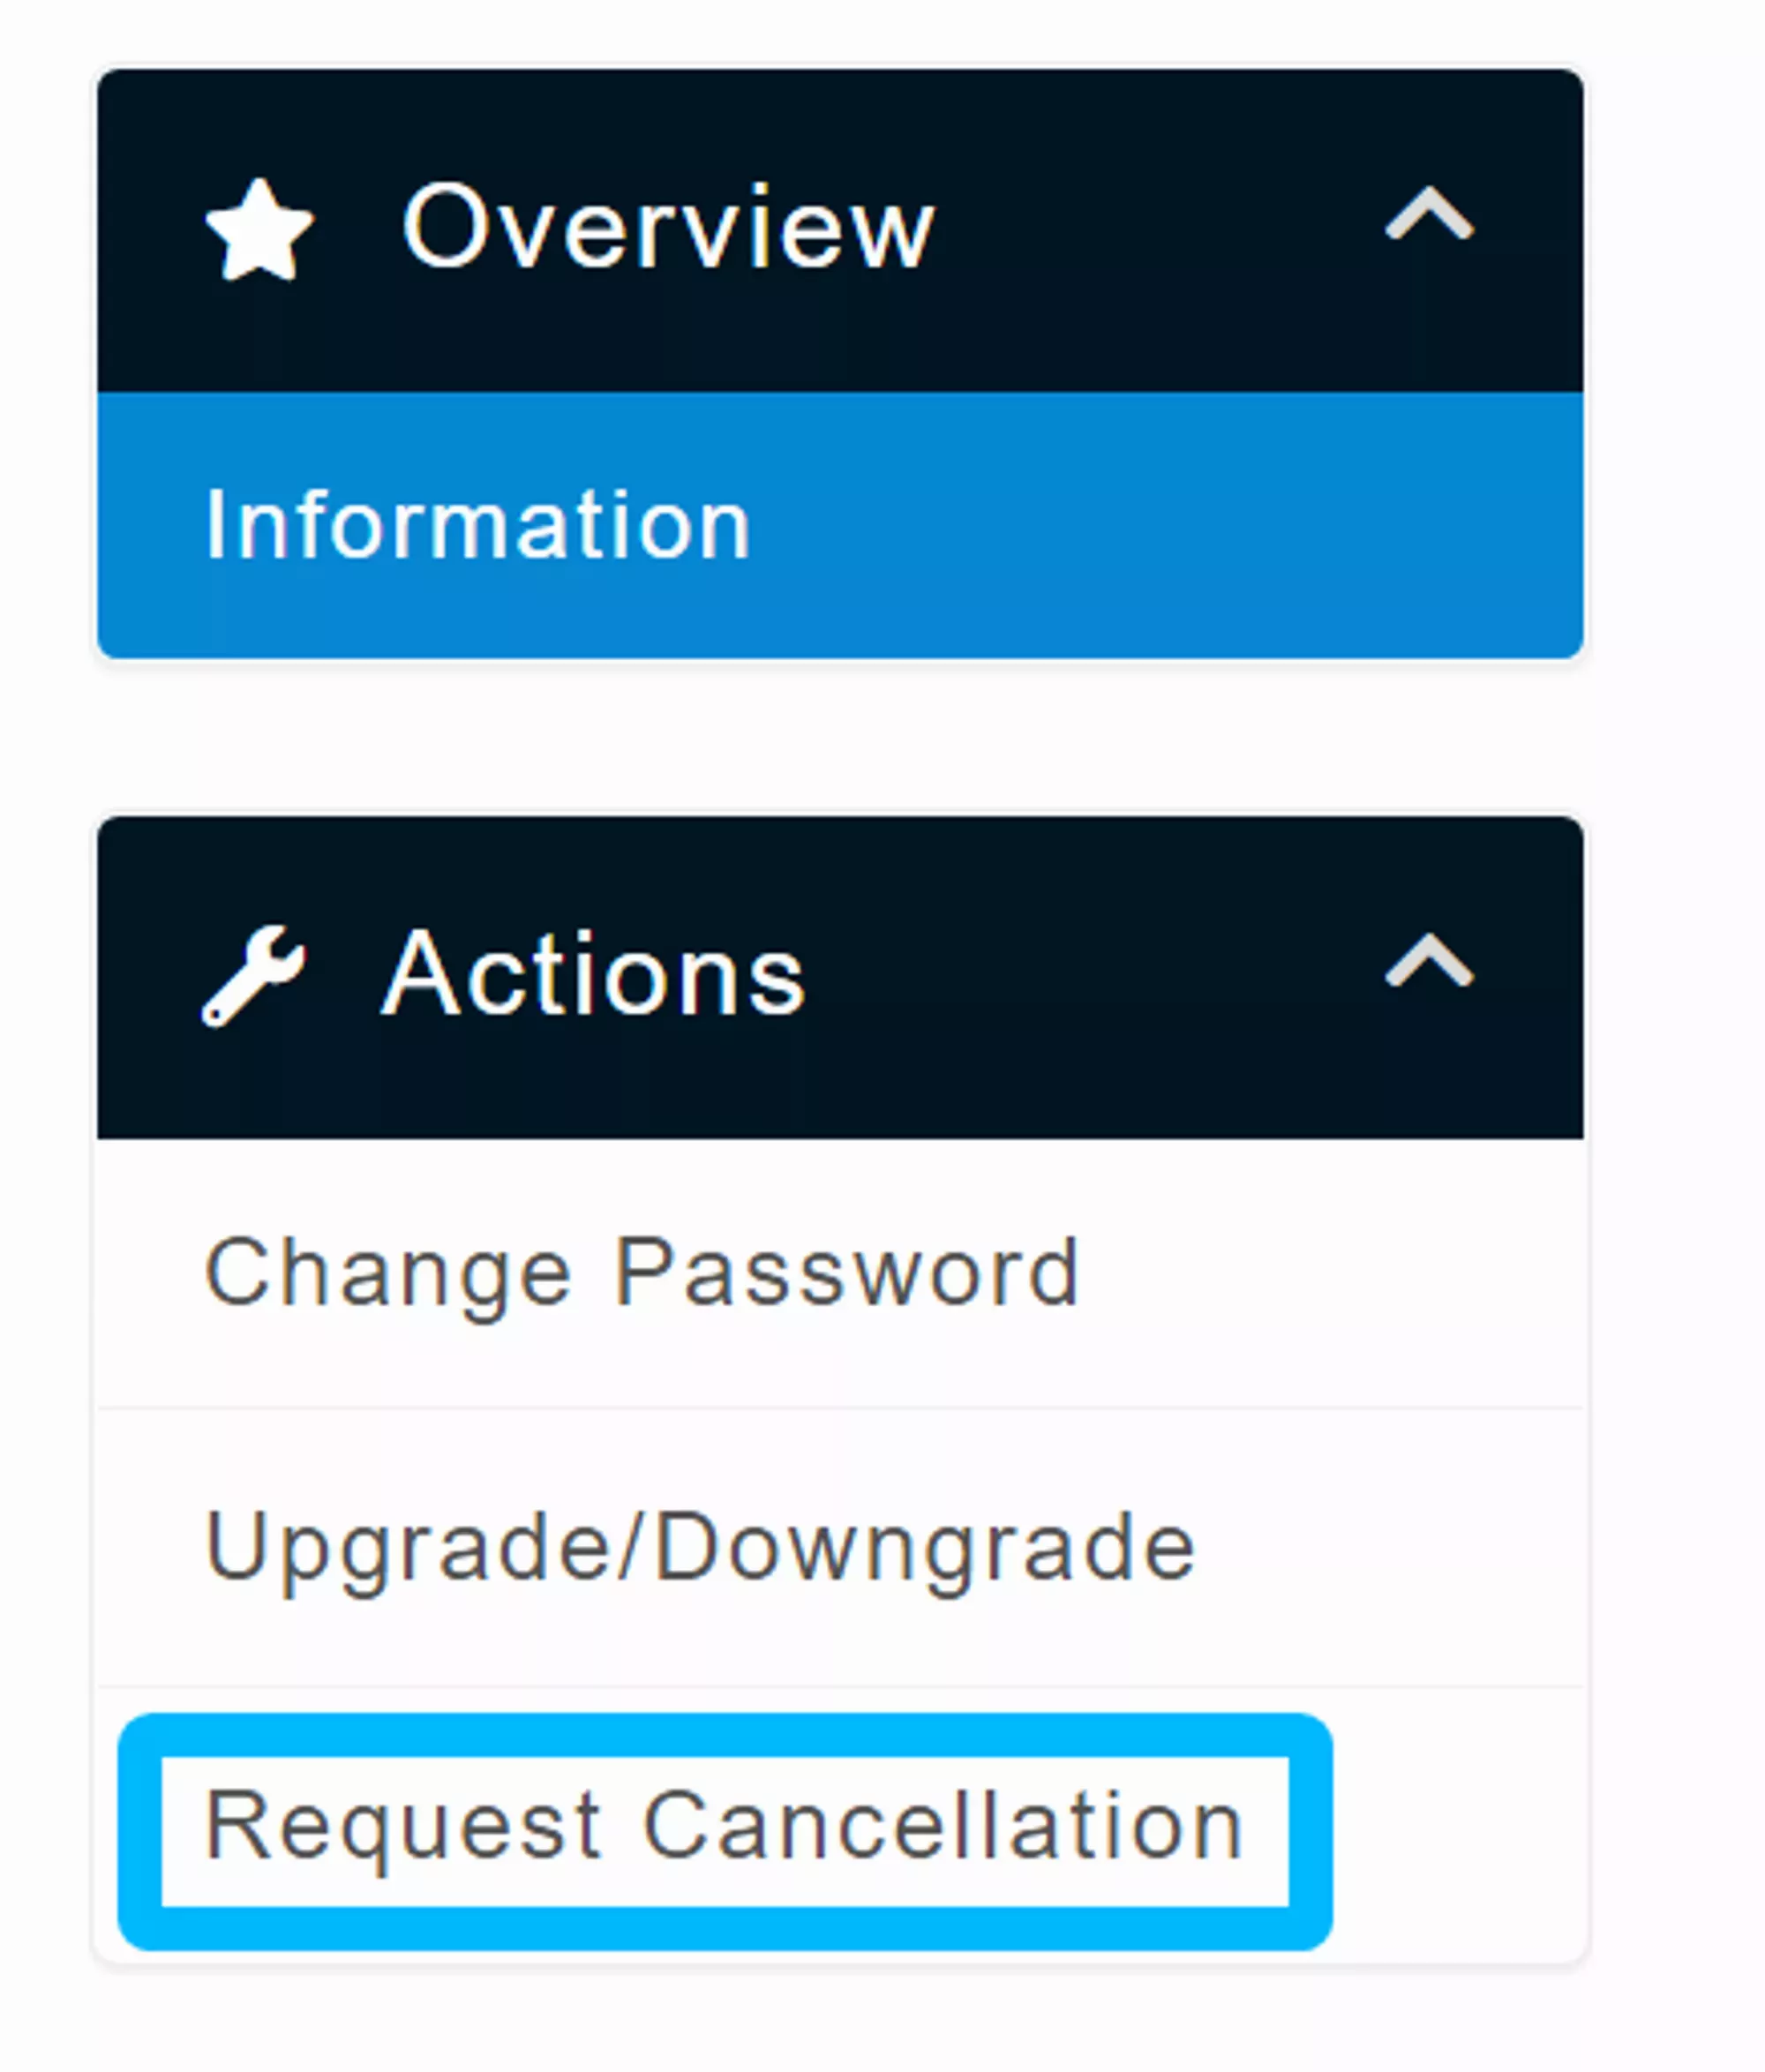 The Request Cancellation button on the Client Area Sidebar